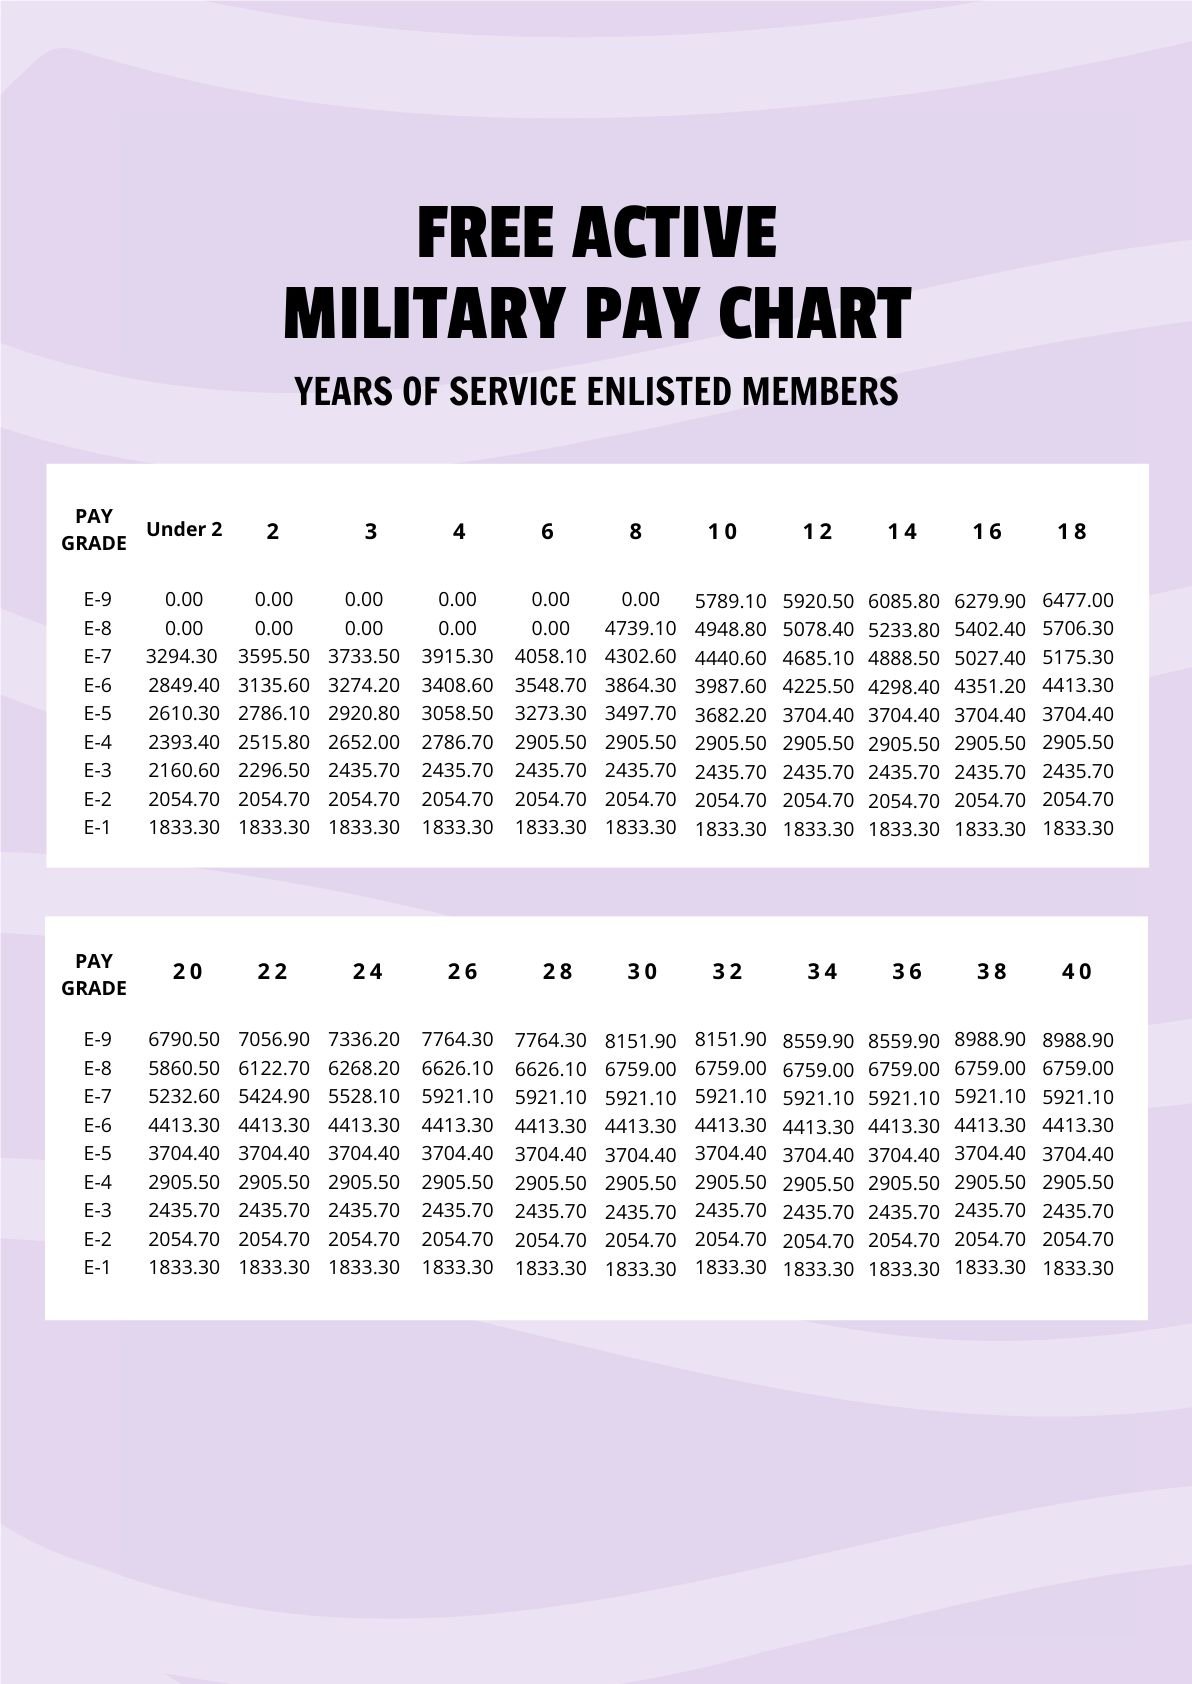 Free Active Military Pay Chart